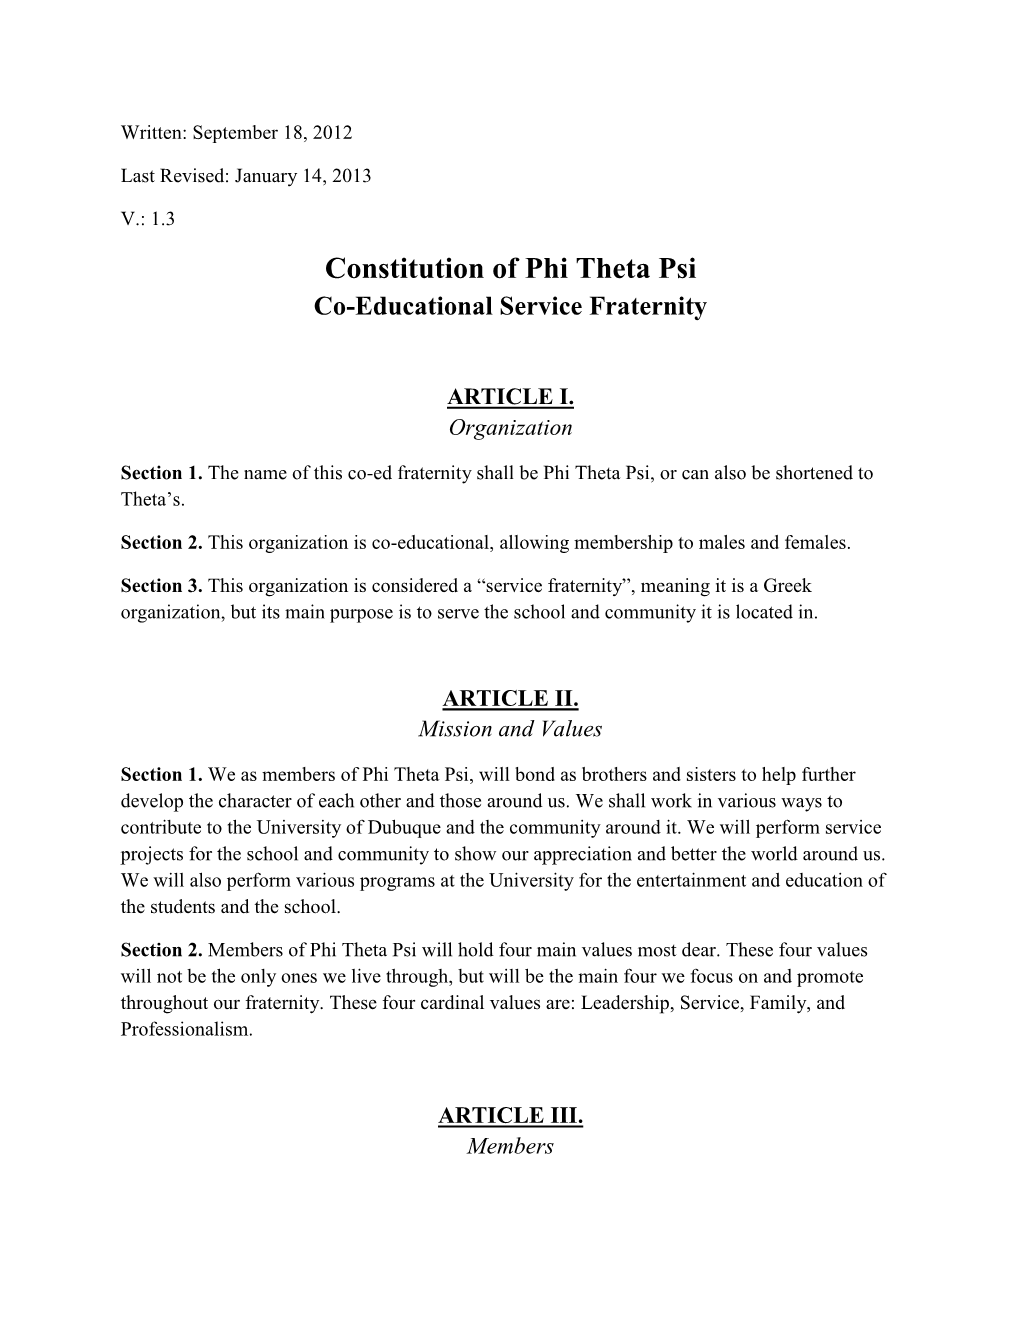 Constitution of Phi Theta Psi Co-Educational Service Fraternity